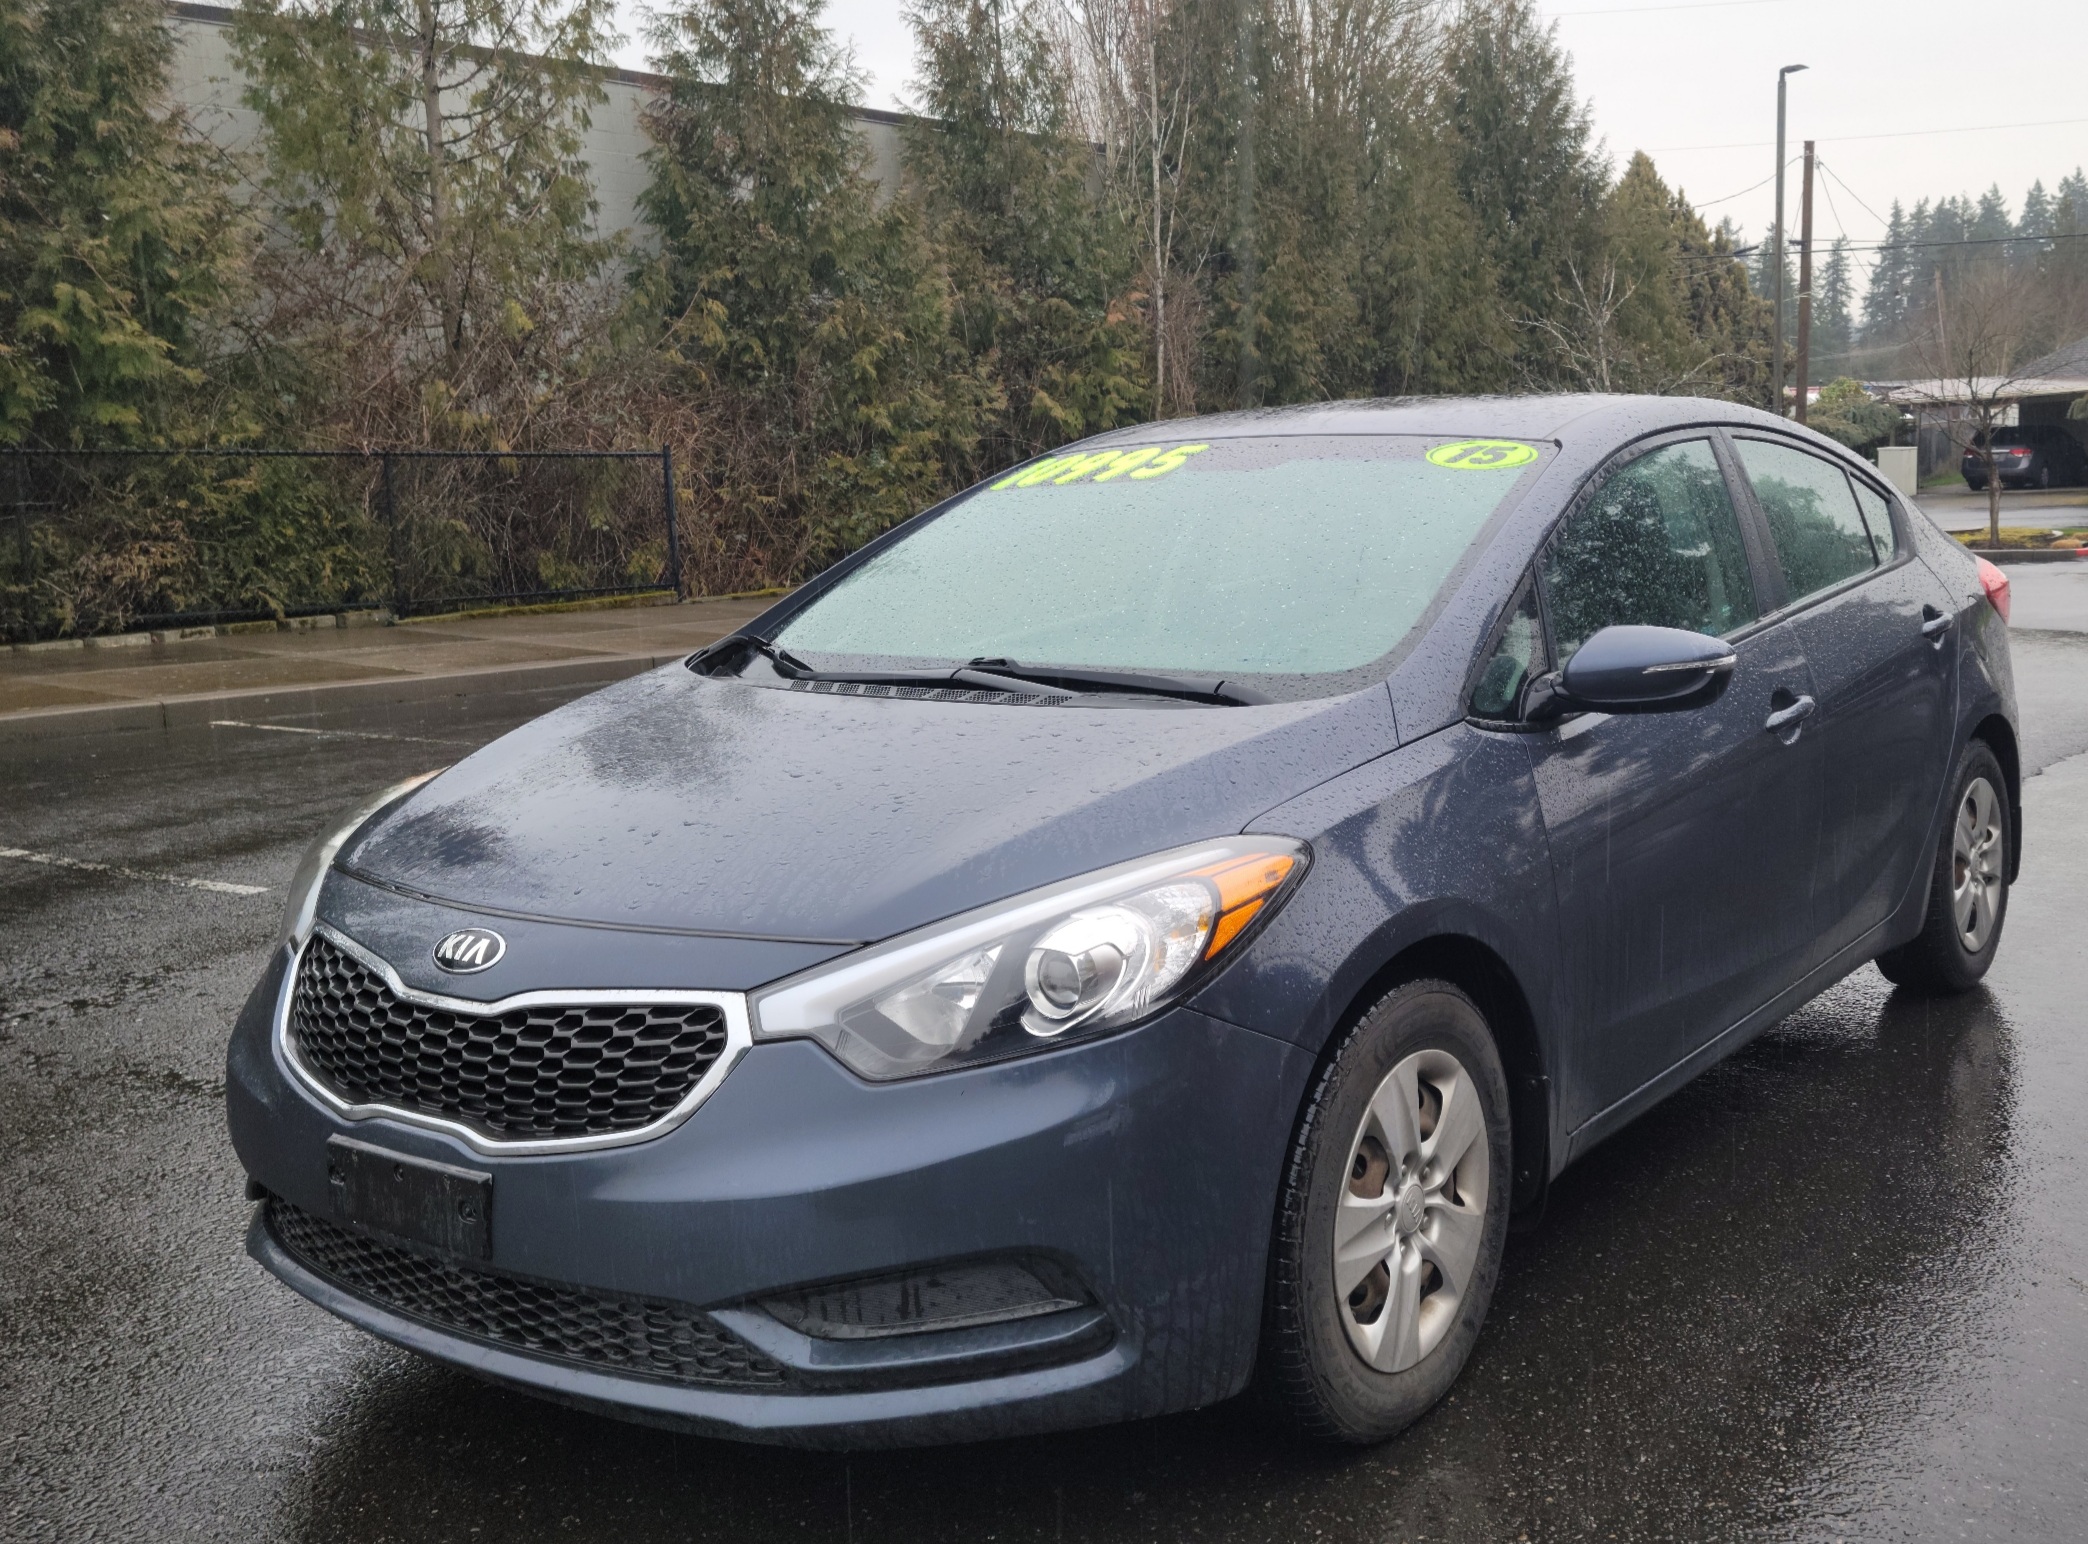 YOU DESERVE A NICER,NEWER, LOW MILE CAR!~2015 KIA FORTE LX SEDAN~UP TO 40  MPG! *ANY CREDIT* - Top Auto Brokers